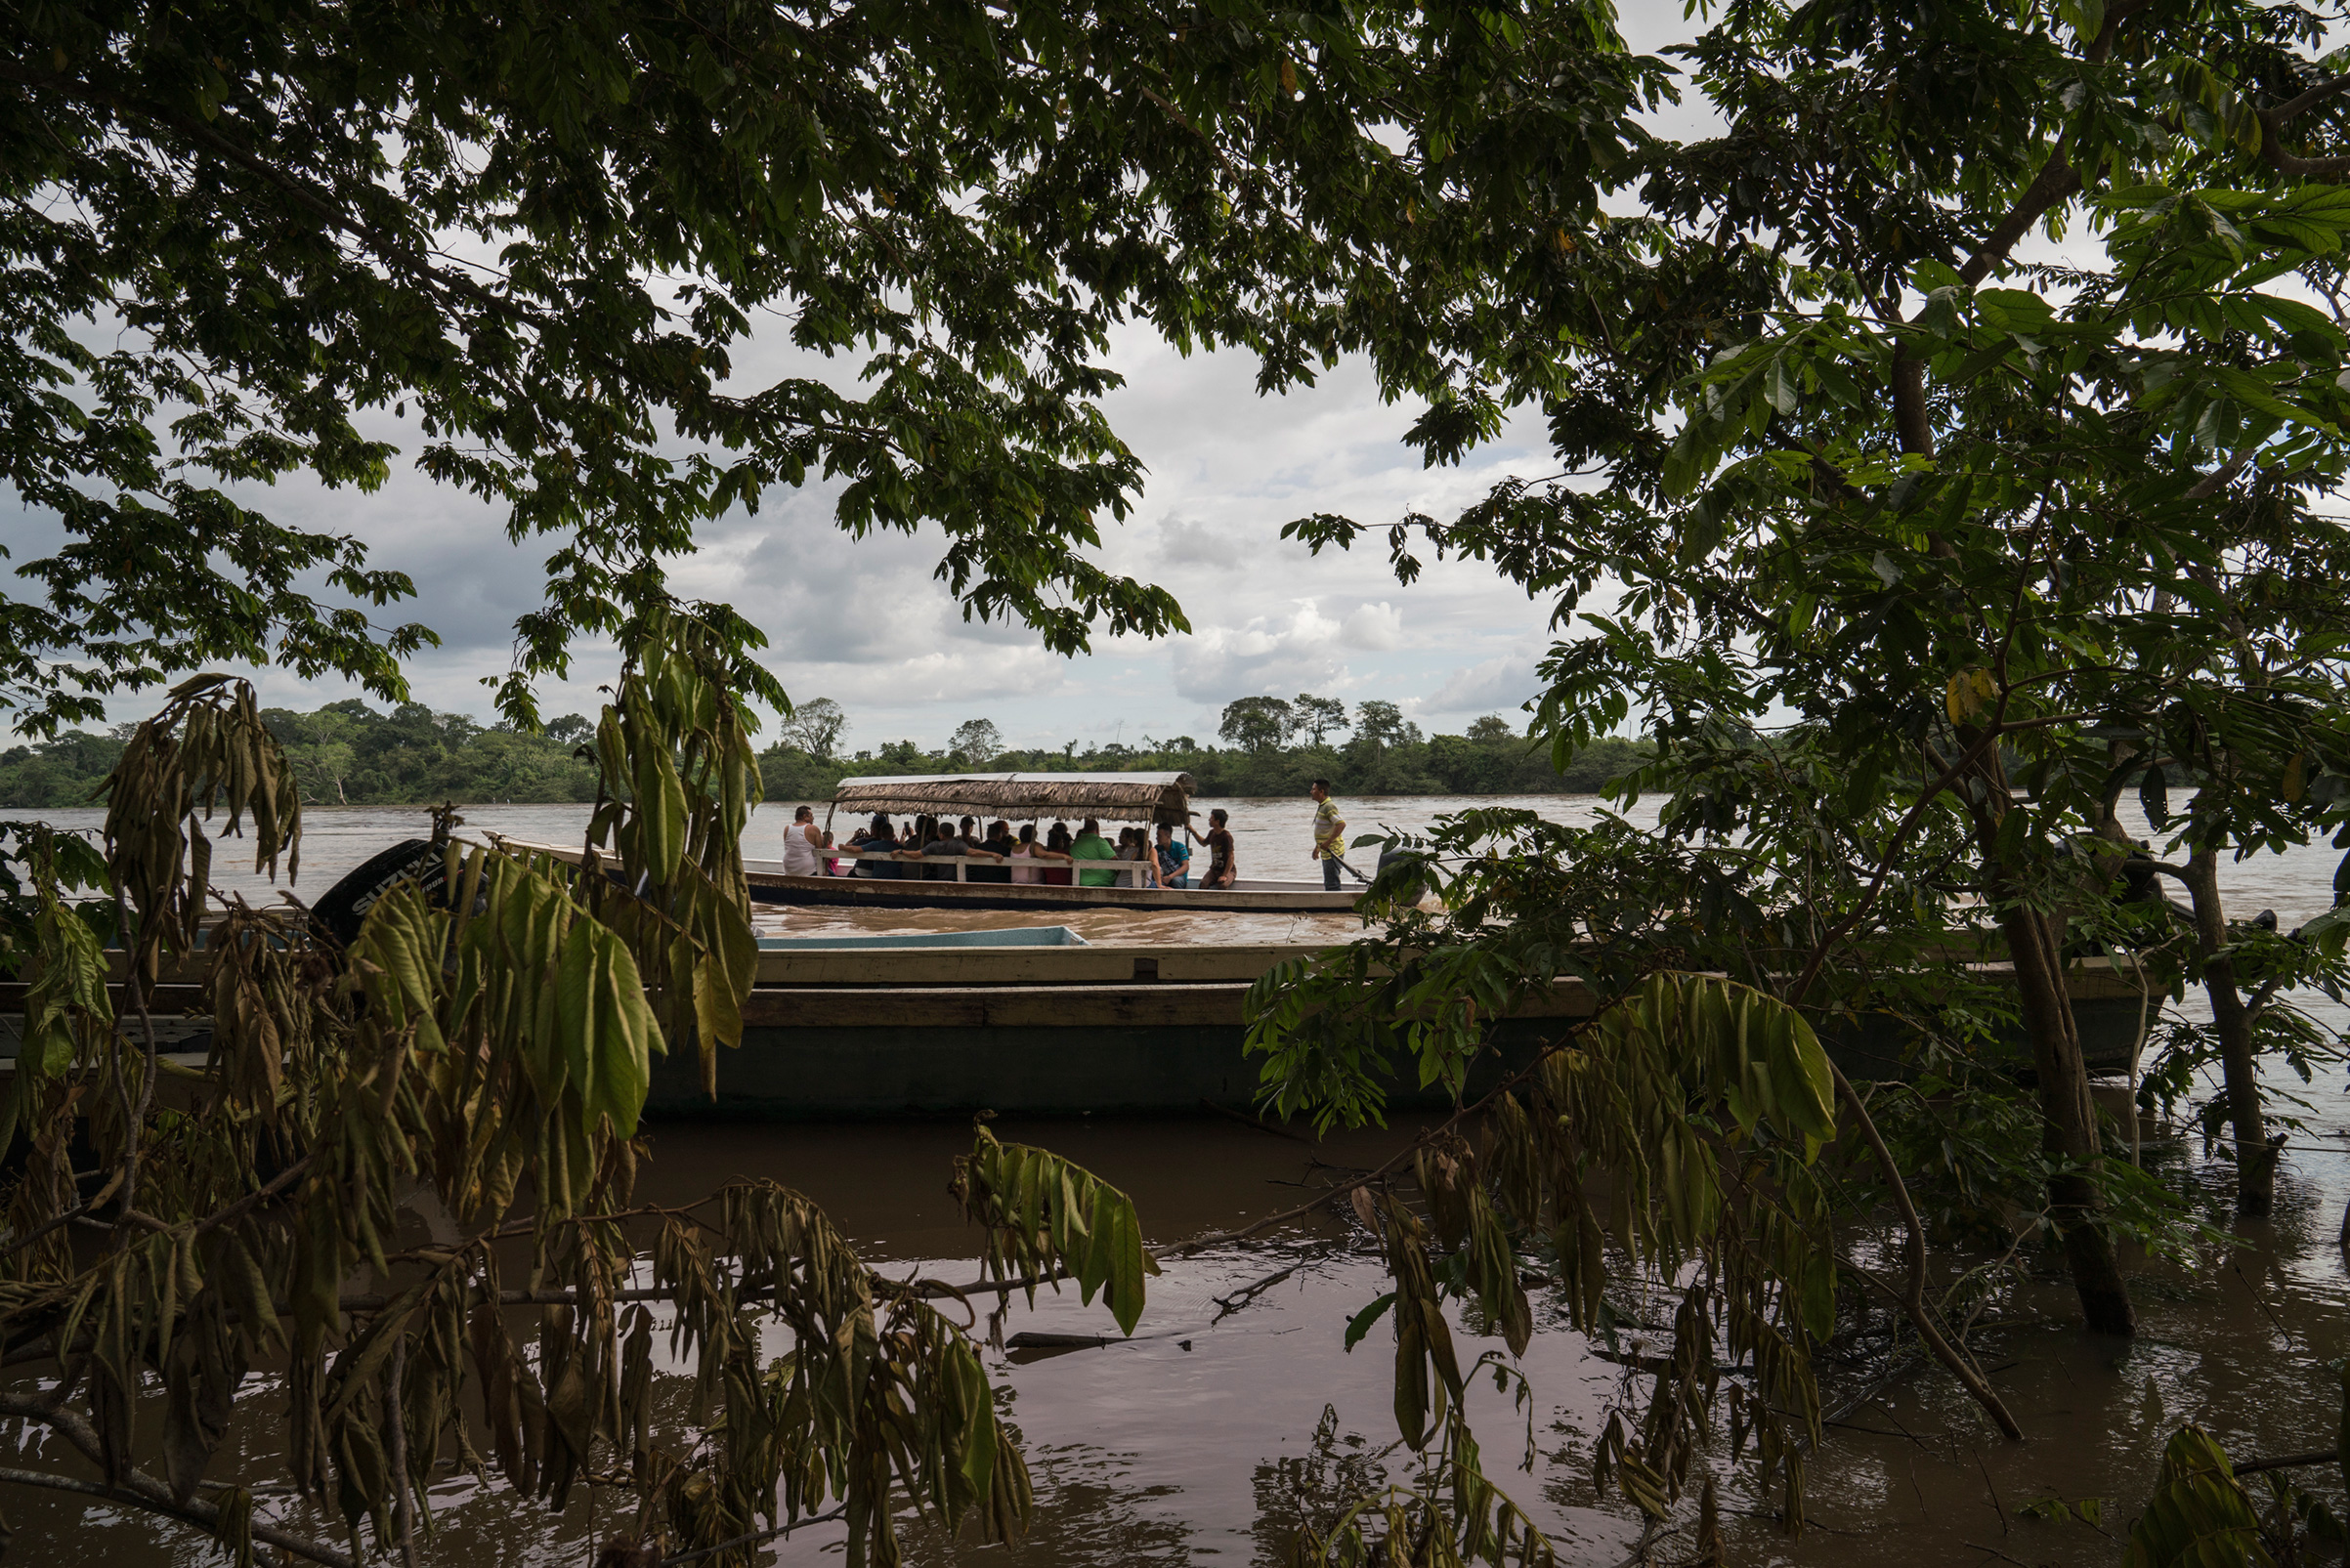 Migrants cross the Usumacinta River between La Técnica, Guatemala and Frontera Corozal, Mexico, on Oct. 21. The Usumacinta River acts as a border between the two countries. There is no immigration inspection in either of the two borders in the area. (Veronica G. Cardenas for TIME)